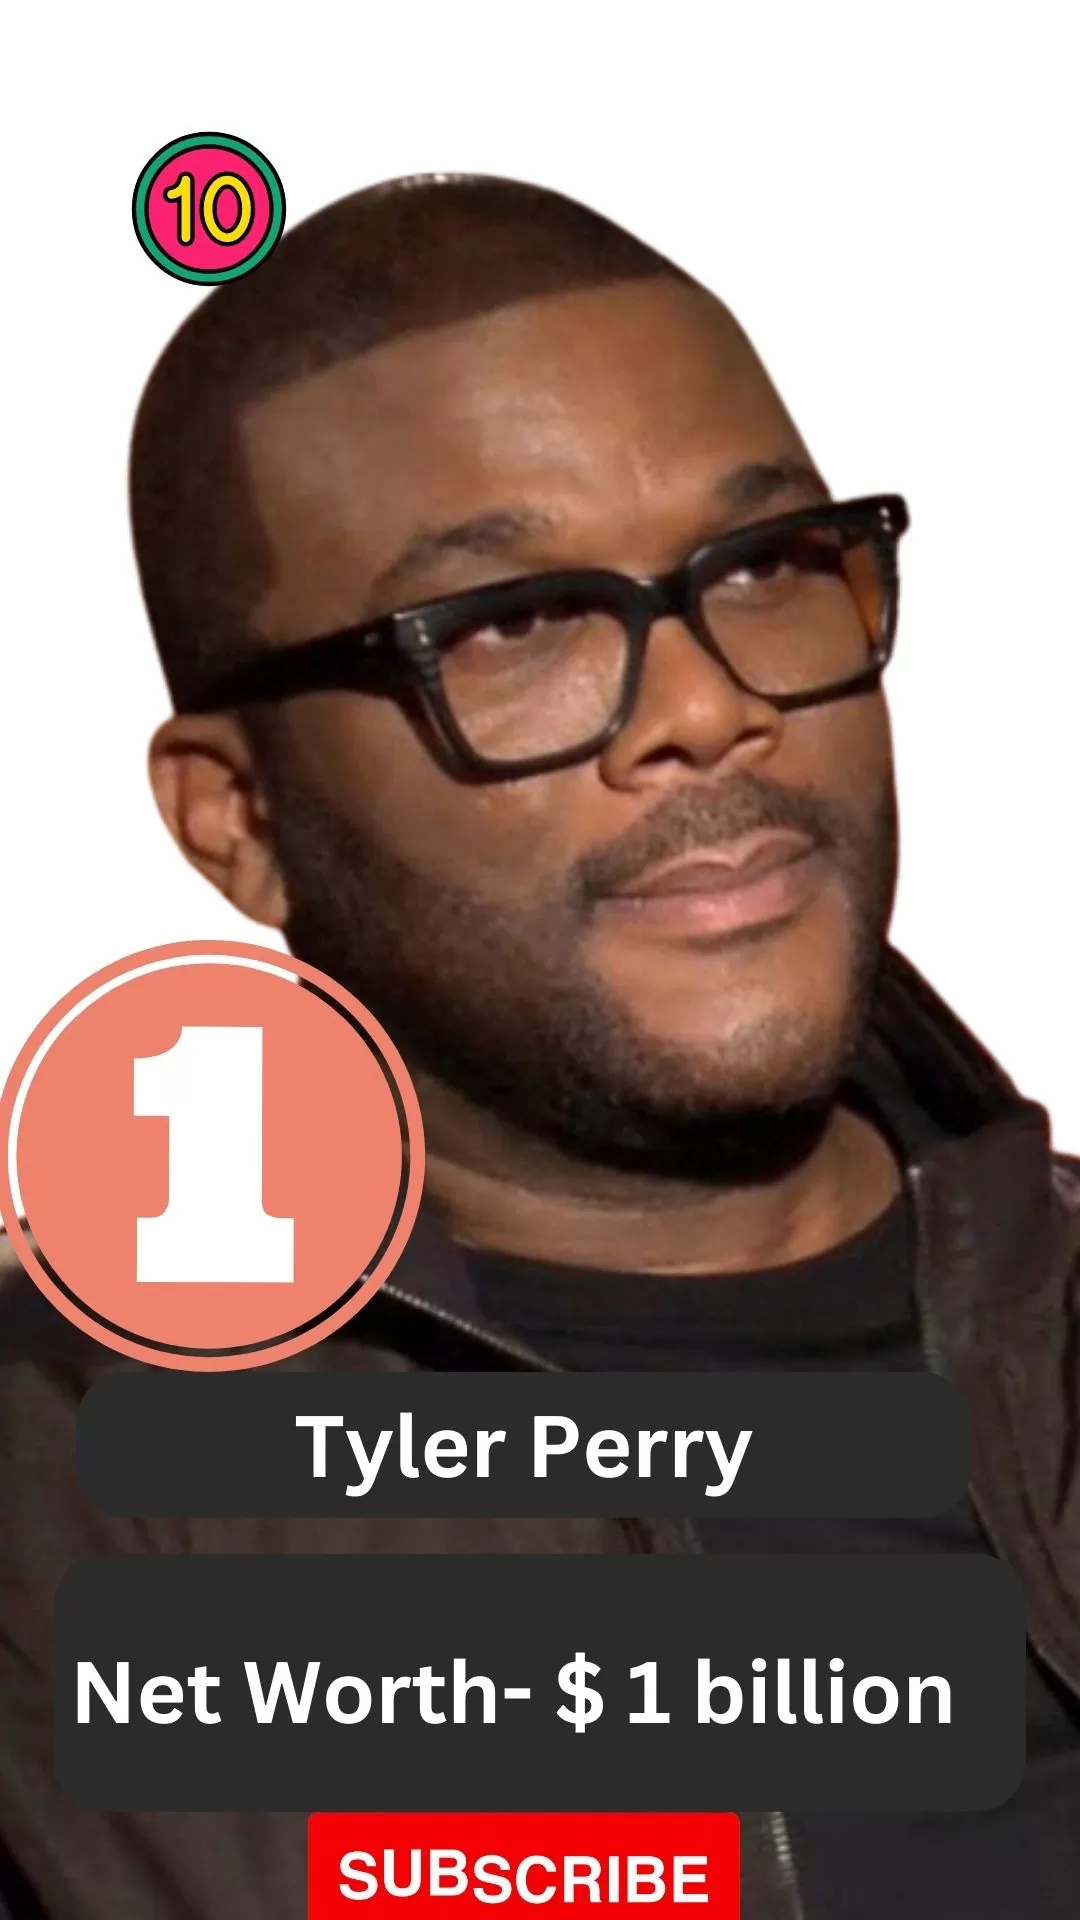 Tyler Perry in position 1 on the richest actor list